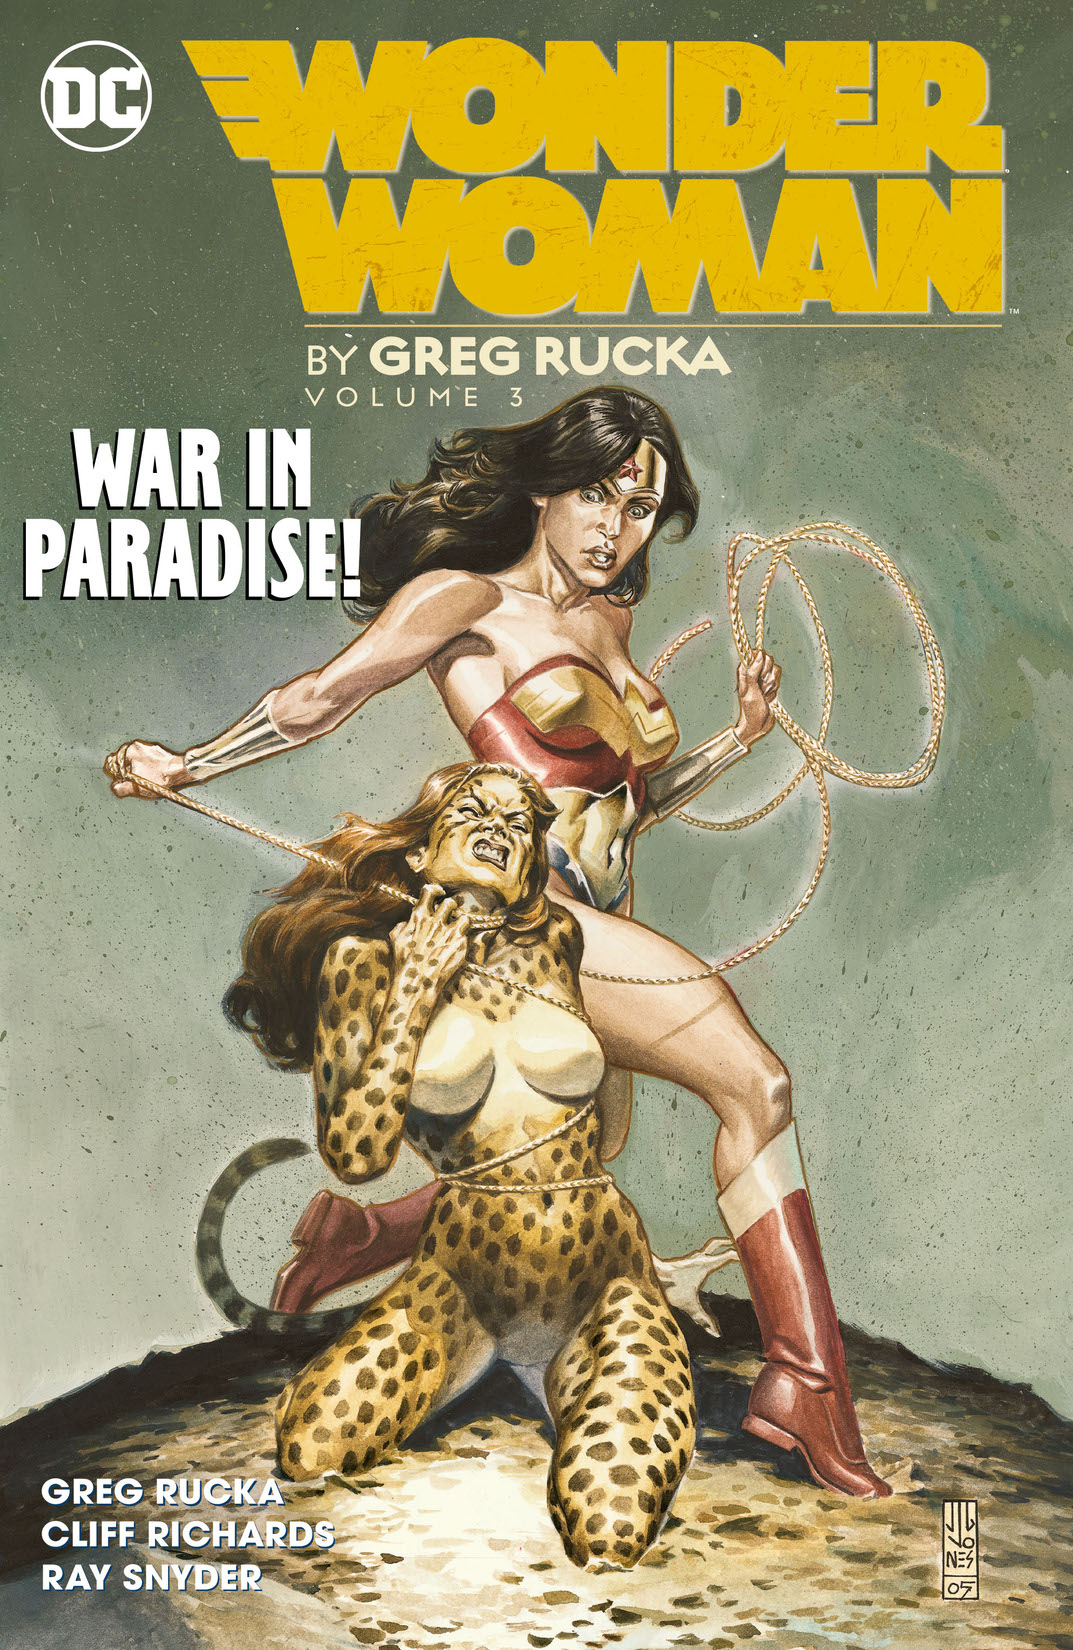 Wonder Woman by Greg Rucka Vol. 3 preview images